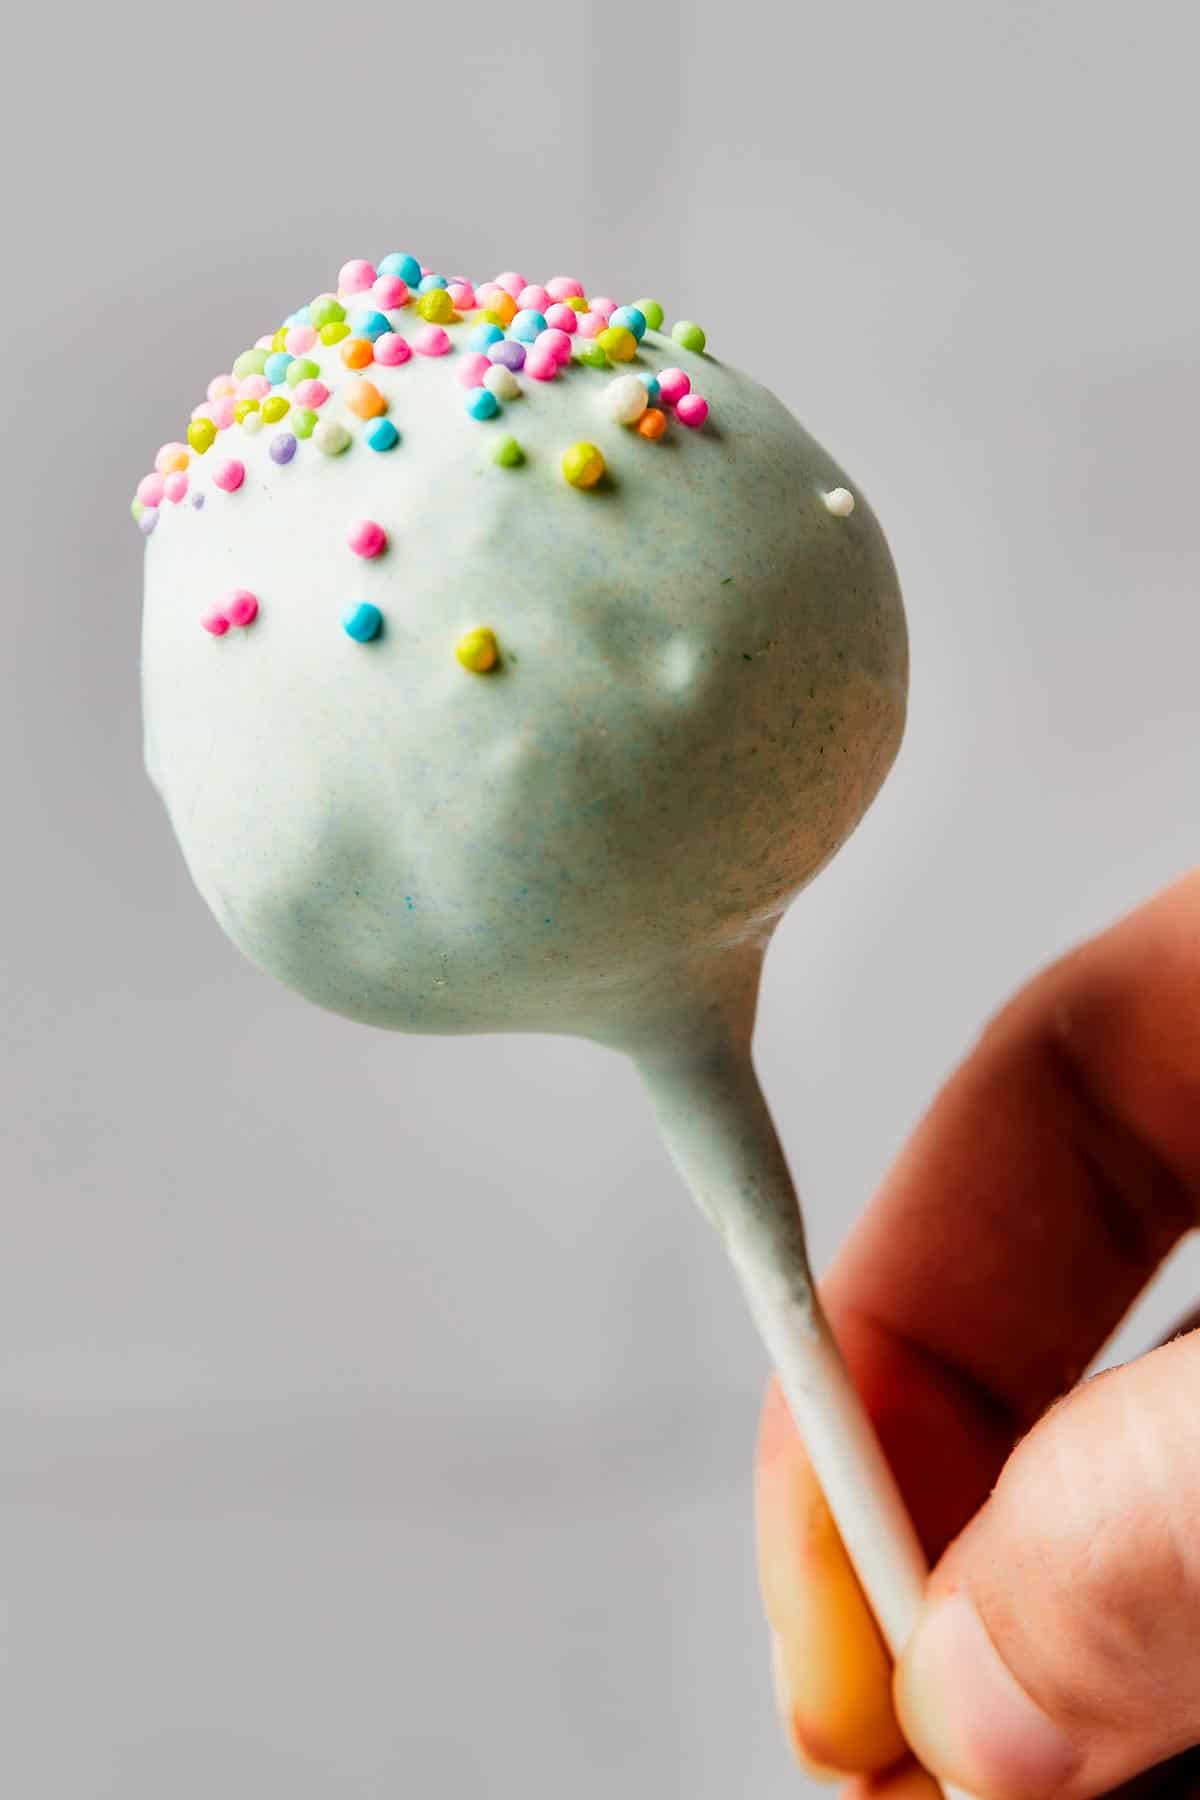 A pastel-colored cake pop with colorful sprinkles.